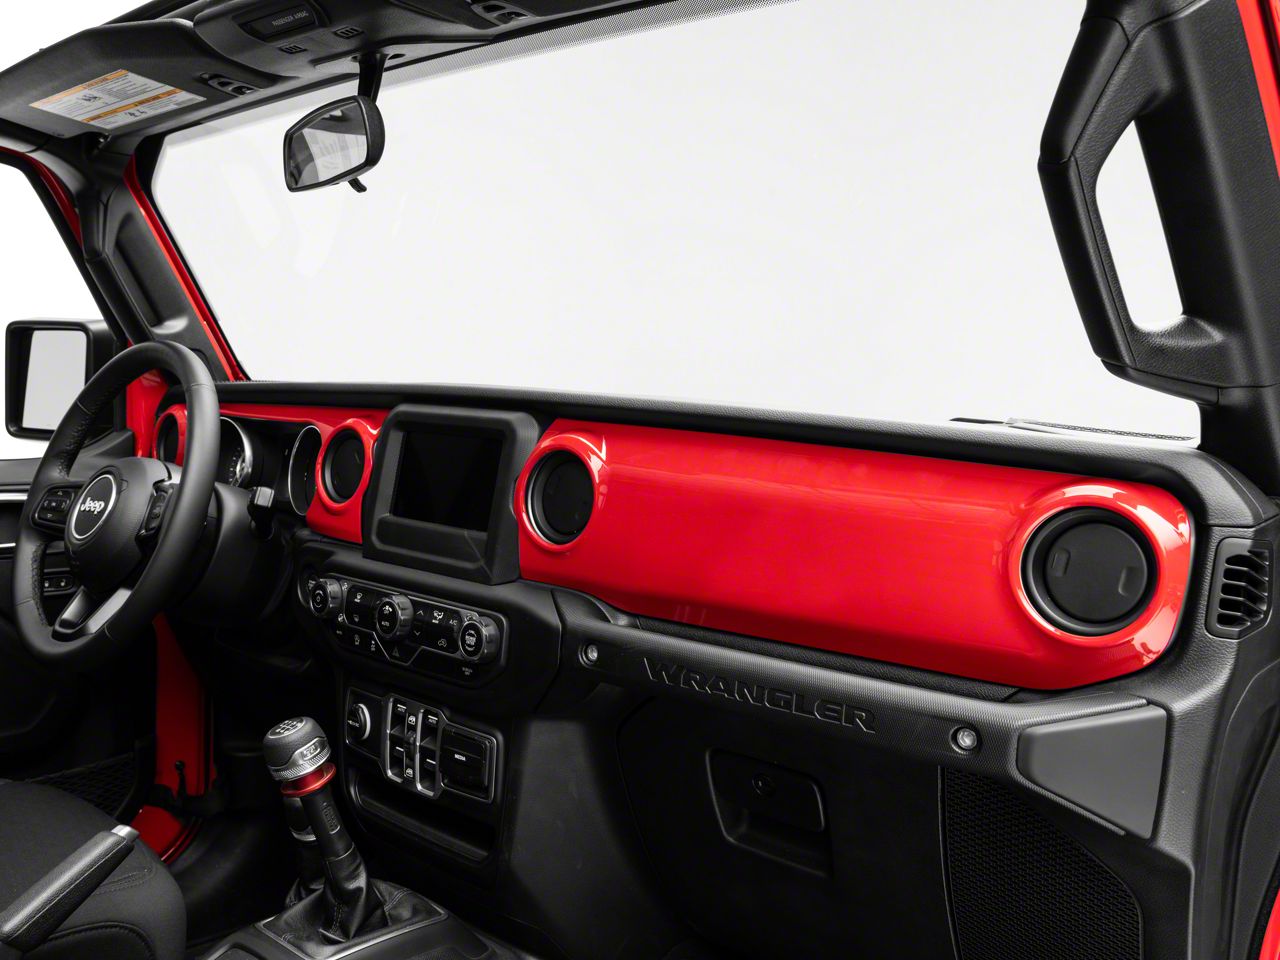 Fit For Jeep Wrangler TJ 1997-2006 ABS Red Car Dashboard Panel Frame Cover Trim